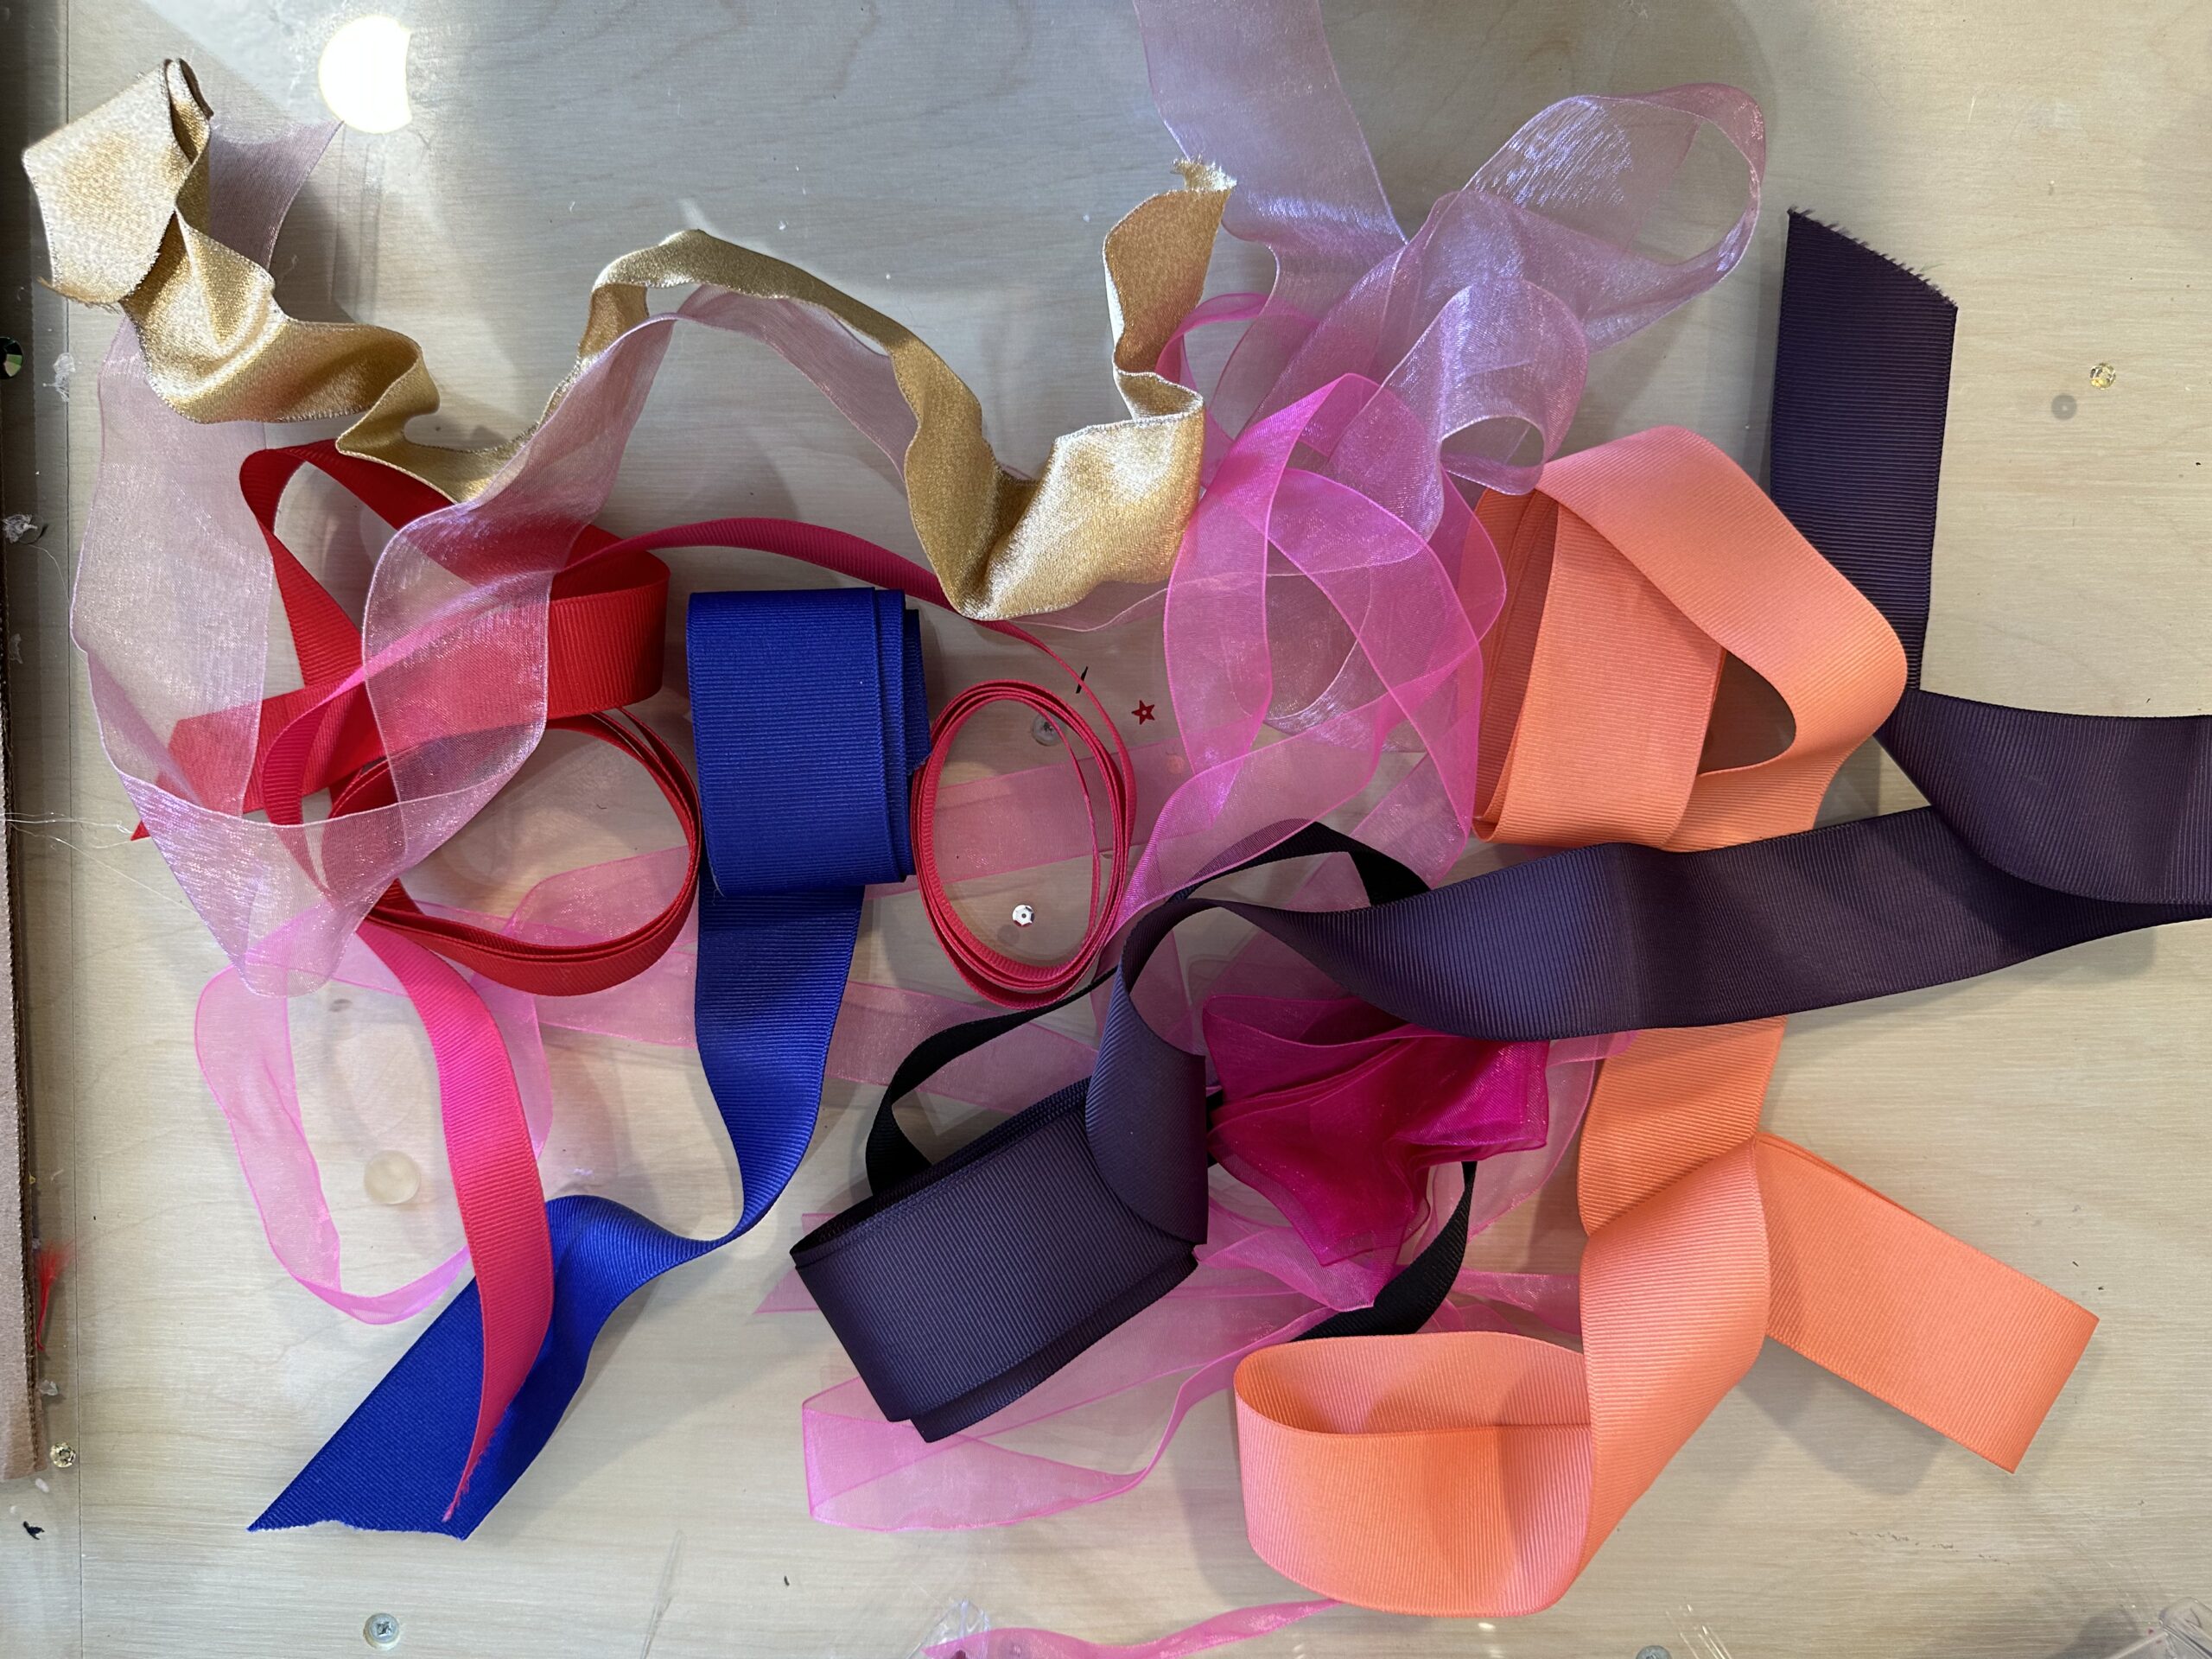 Random pile of different color and material ribbons